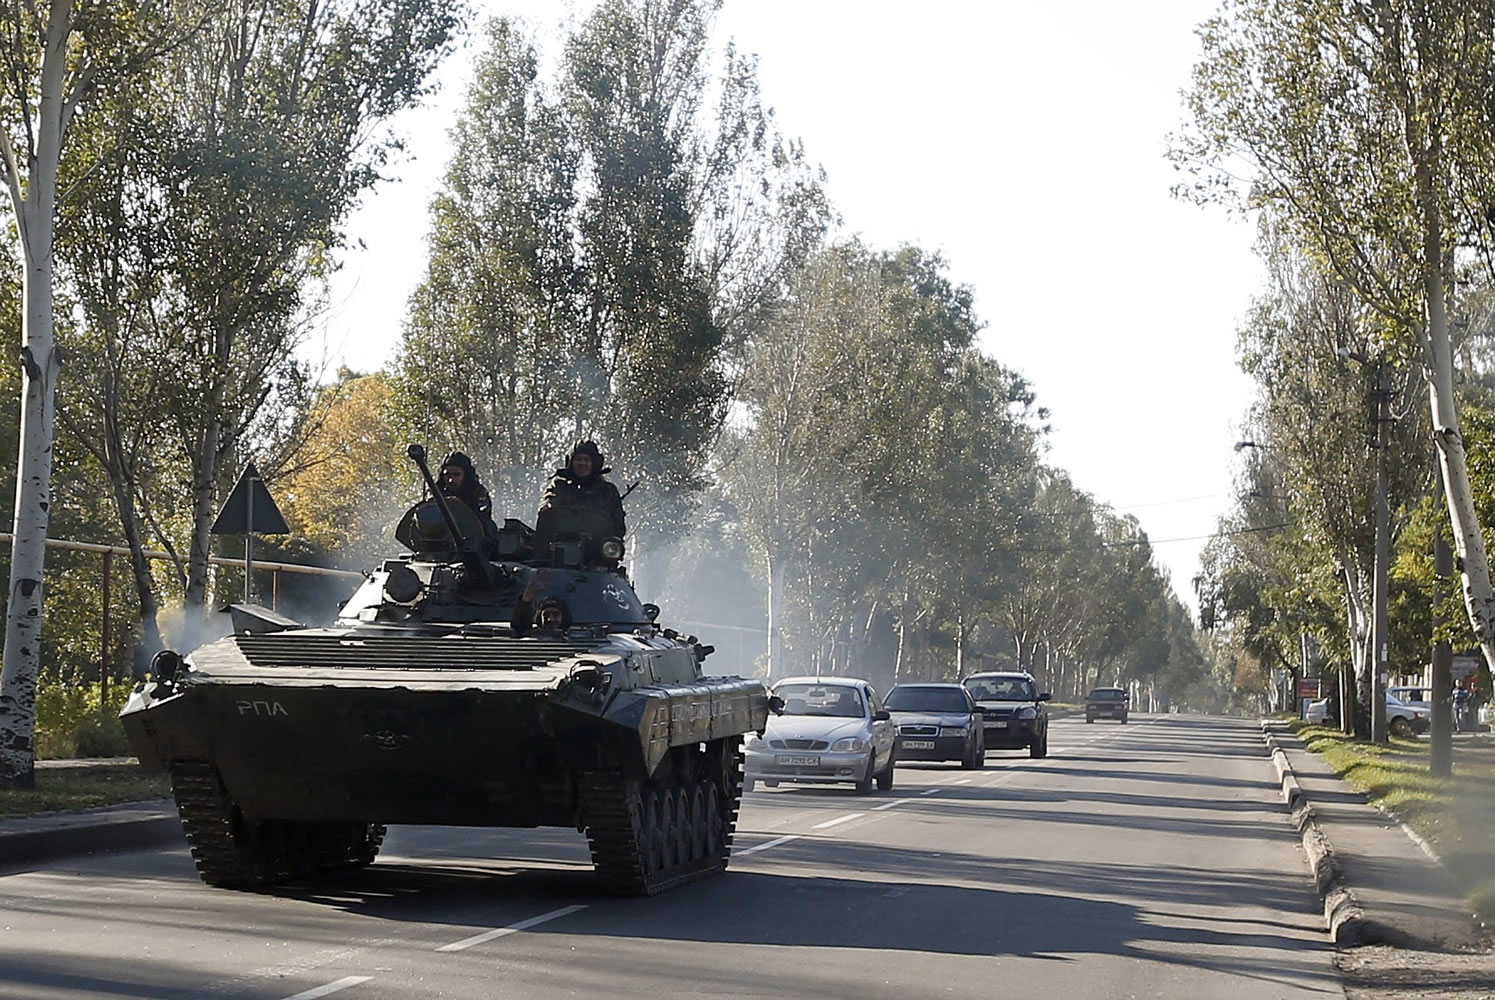 A pro-Russian  armored personal carrier passes through the town of Donetsk, eastern Ukraine, Thursday, Oct. 2, 2014. Pro-Russian rebels in eastern Ukraine advanced Wednesday on the government-held airport in Donetsk, pressing to seize the key transportation hub even as the two sides bargained over a troop pullout under a much-violated truce.